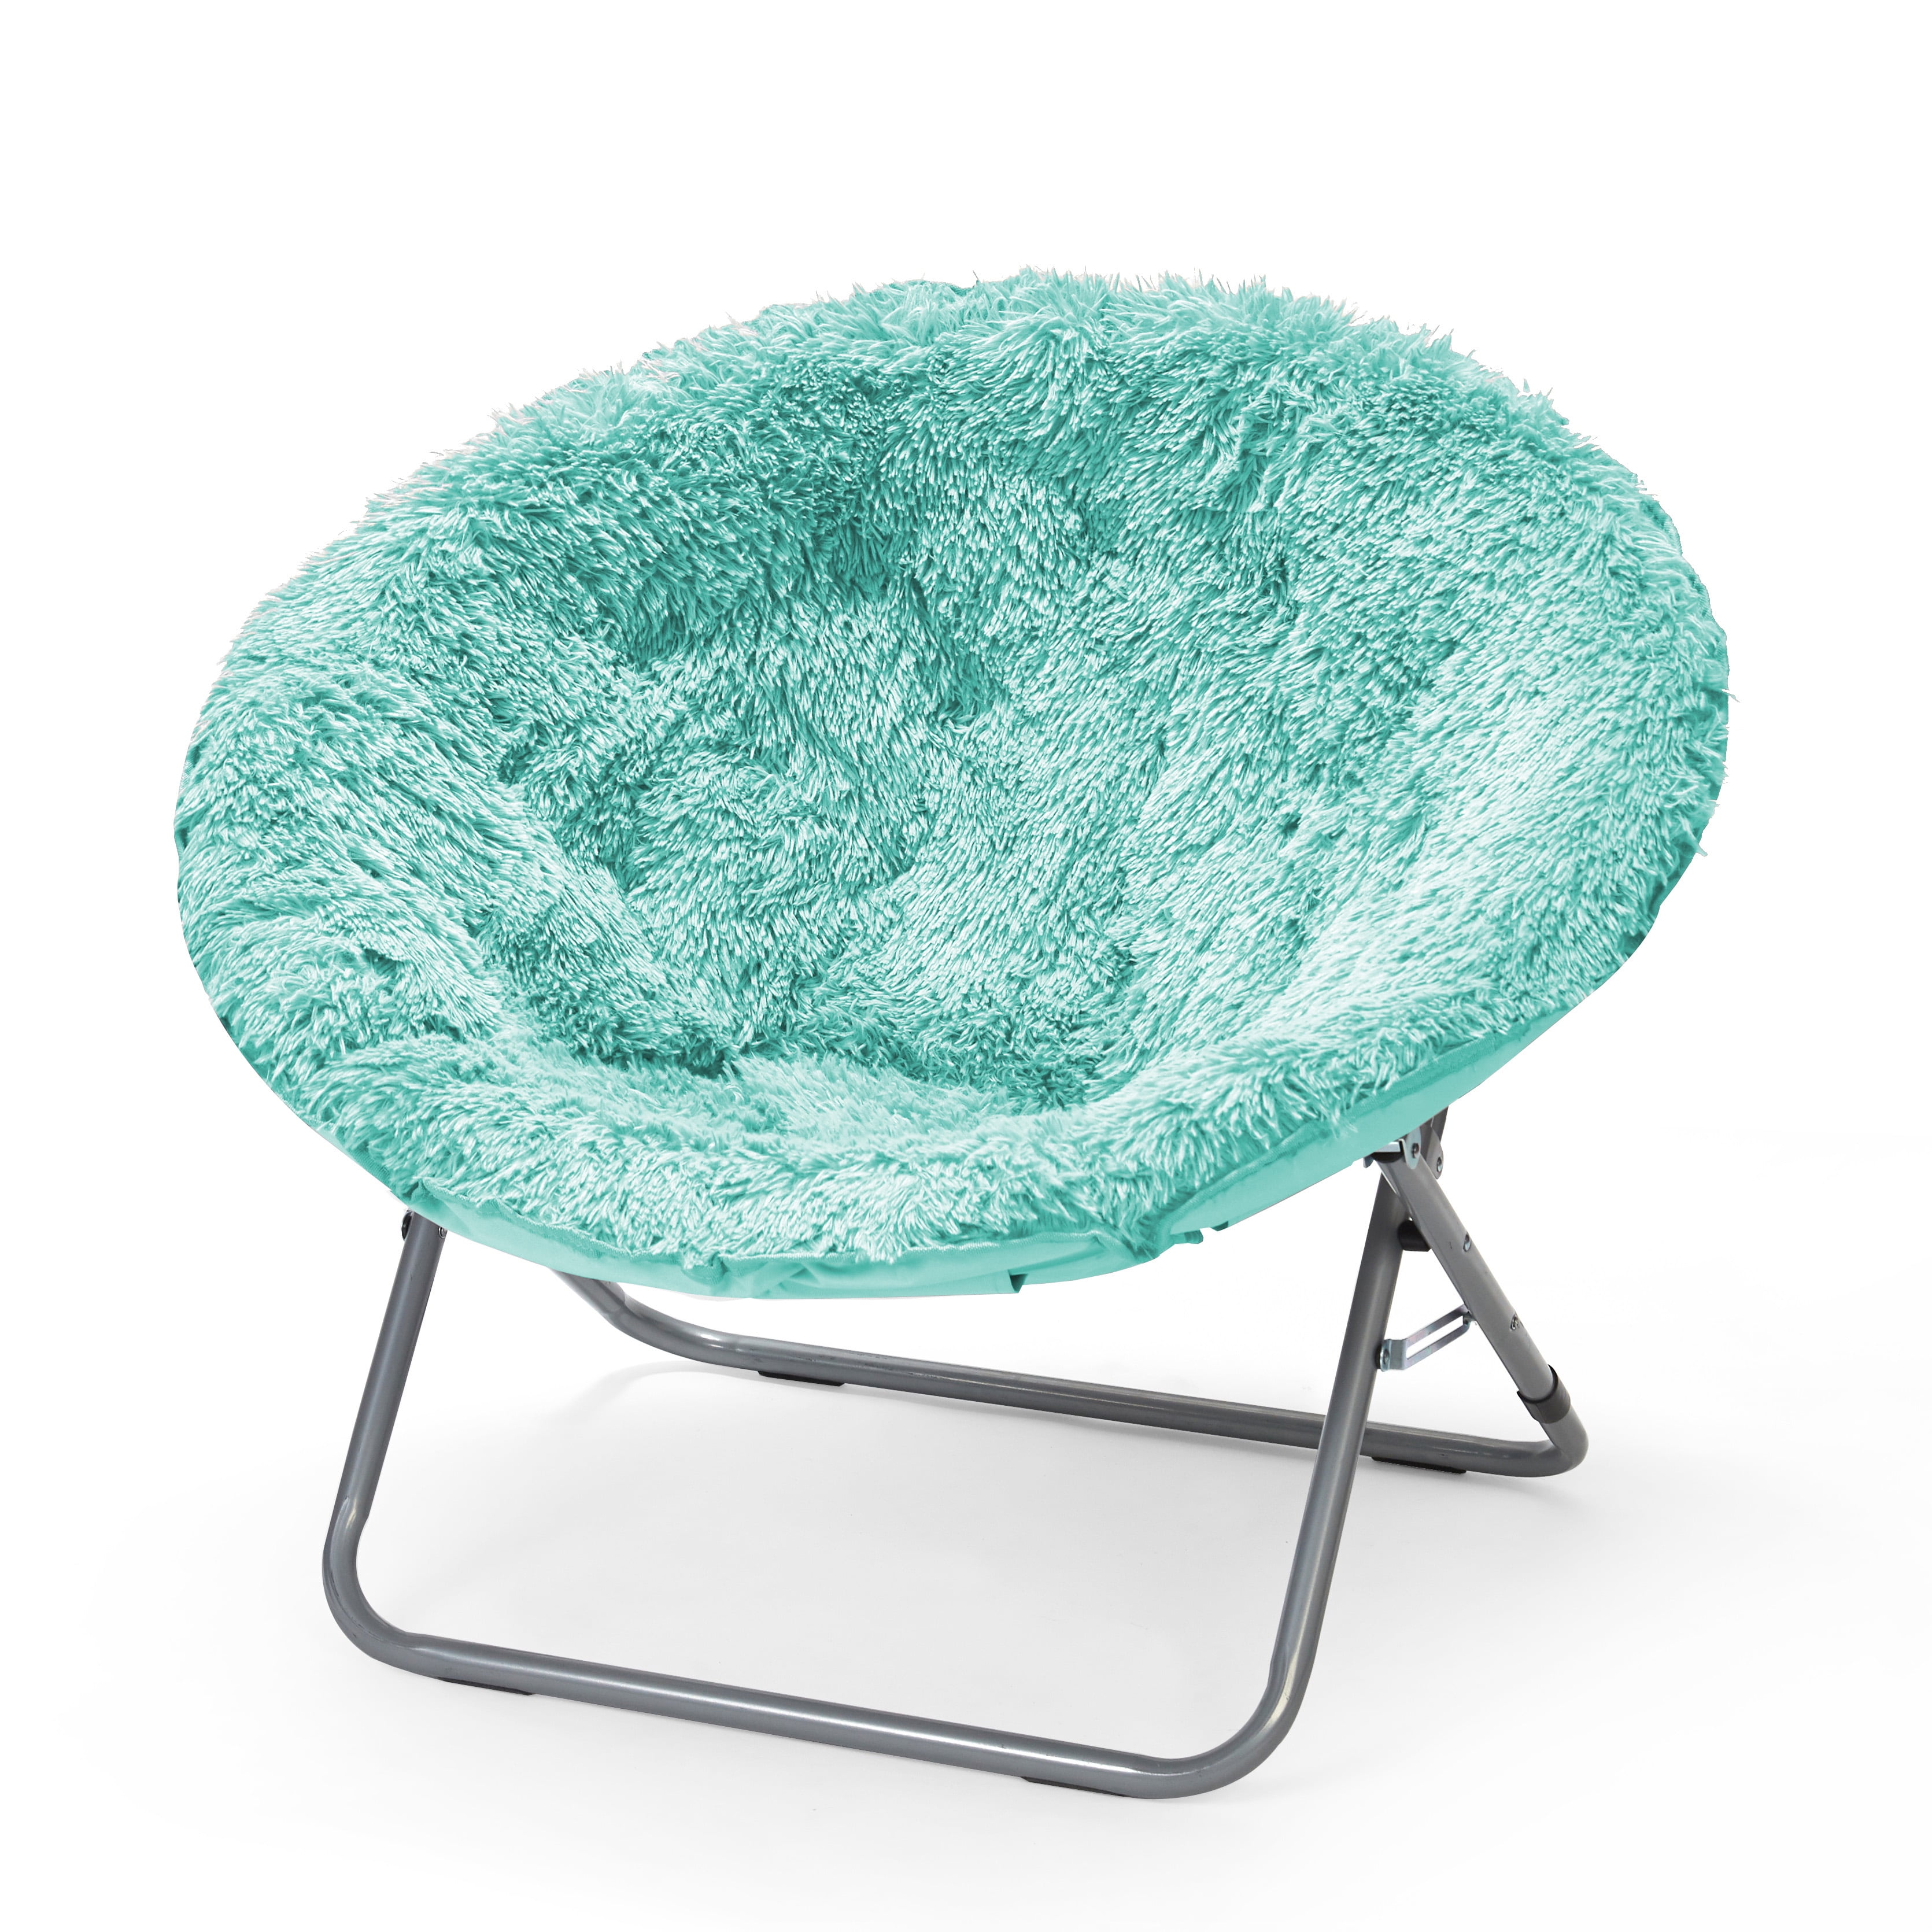 Aqua Wind Urban Shop Faux Fur Saucer Chair with Metal Frame One Size Polyester Pillow